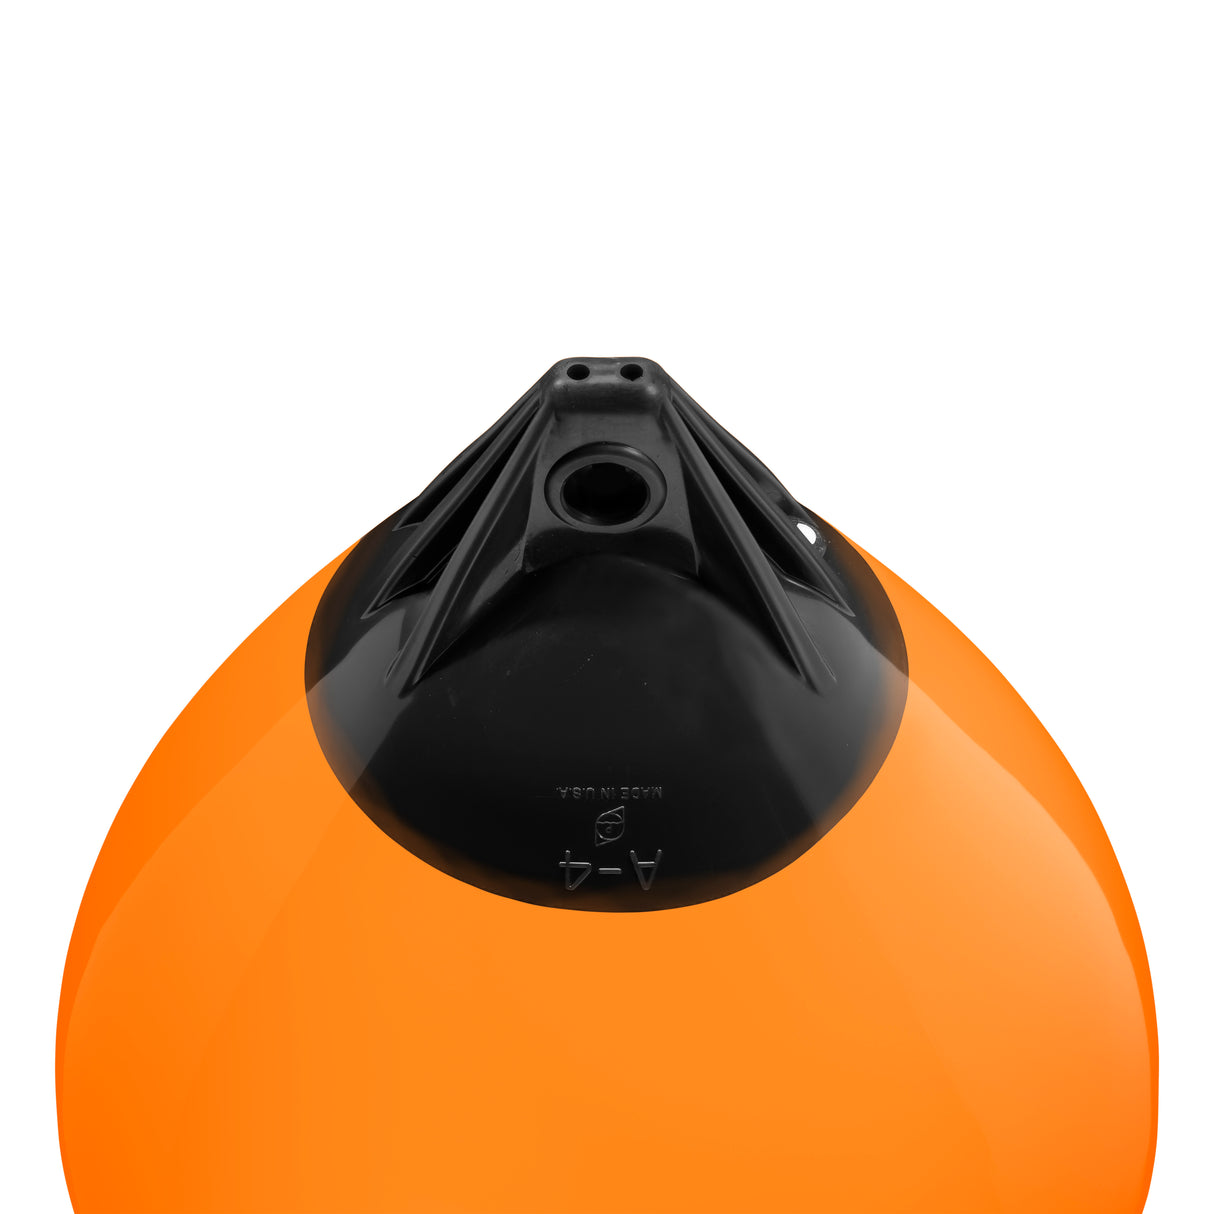 Orange buoy with Black-Top, Polyform A-4 angled shot